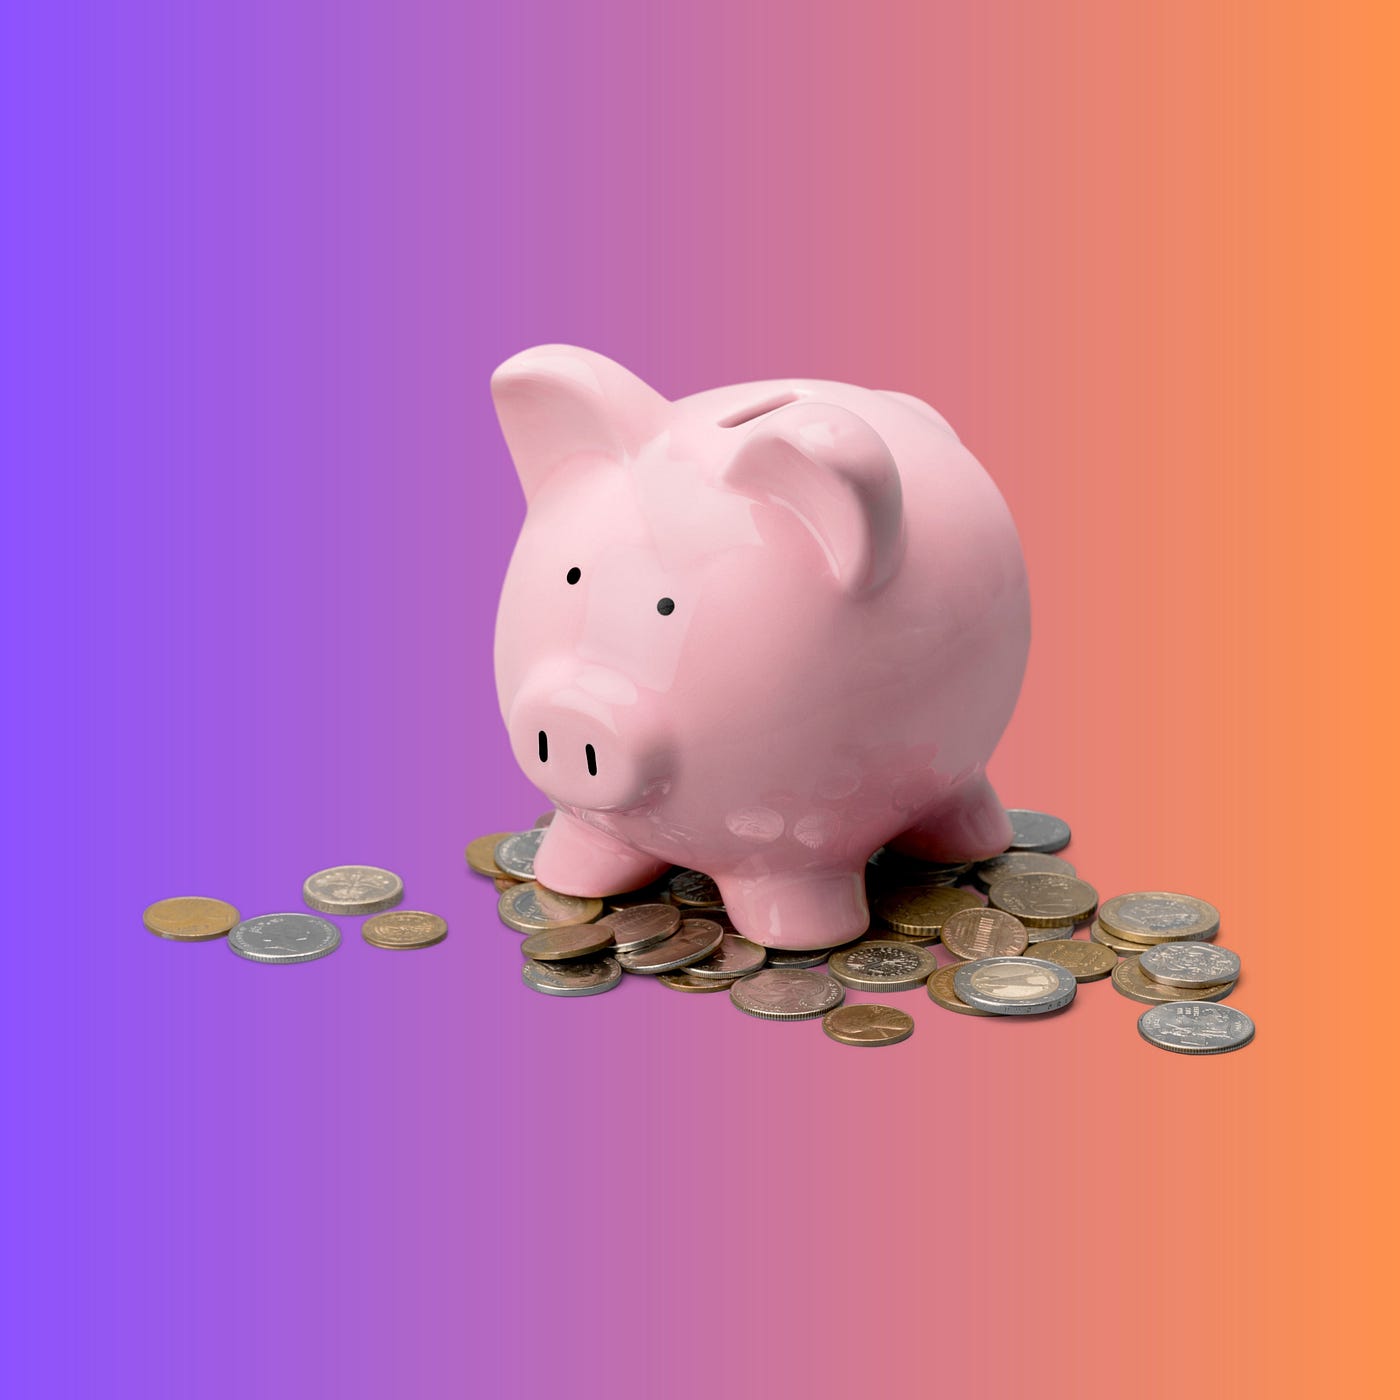 The Tale of the Piggy Bank: How the Pig Became the Symbol of Saving Money |  by Weal | Medium